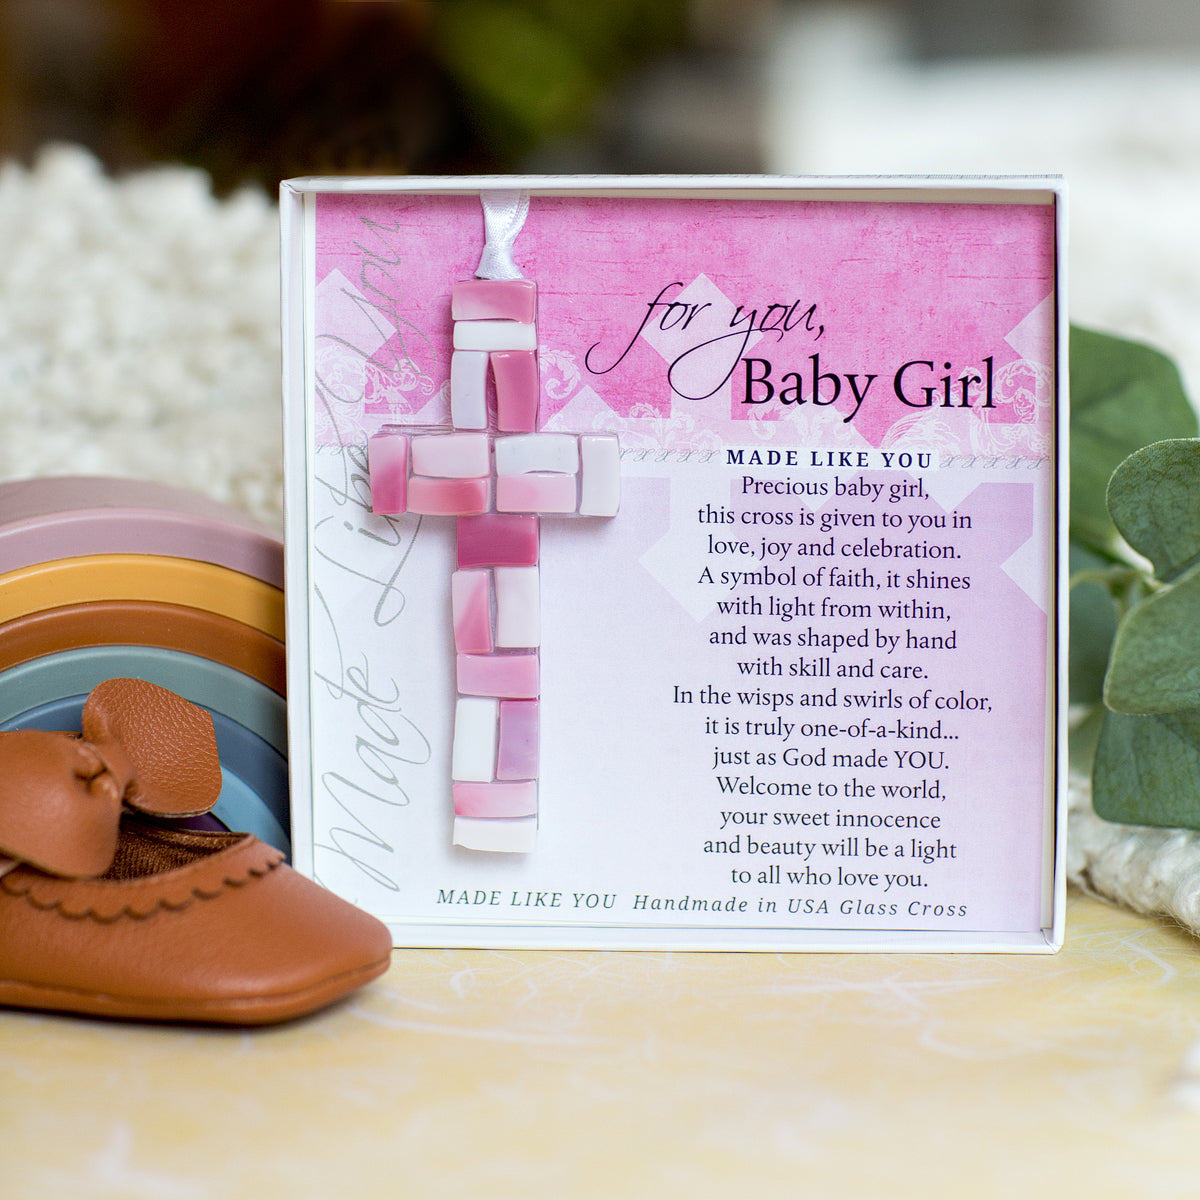 For You Baby Girl gift in nursery setting.